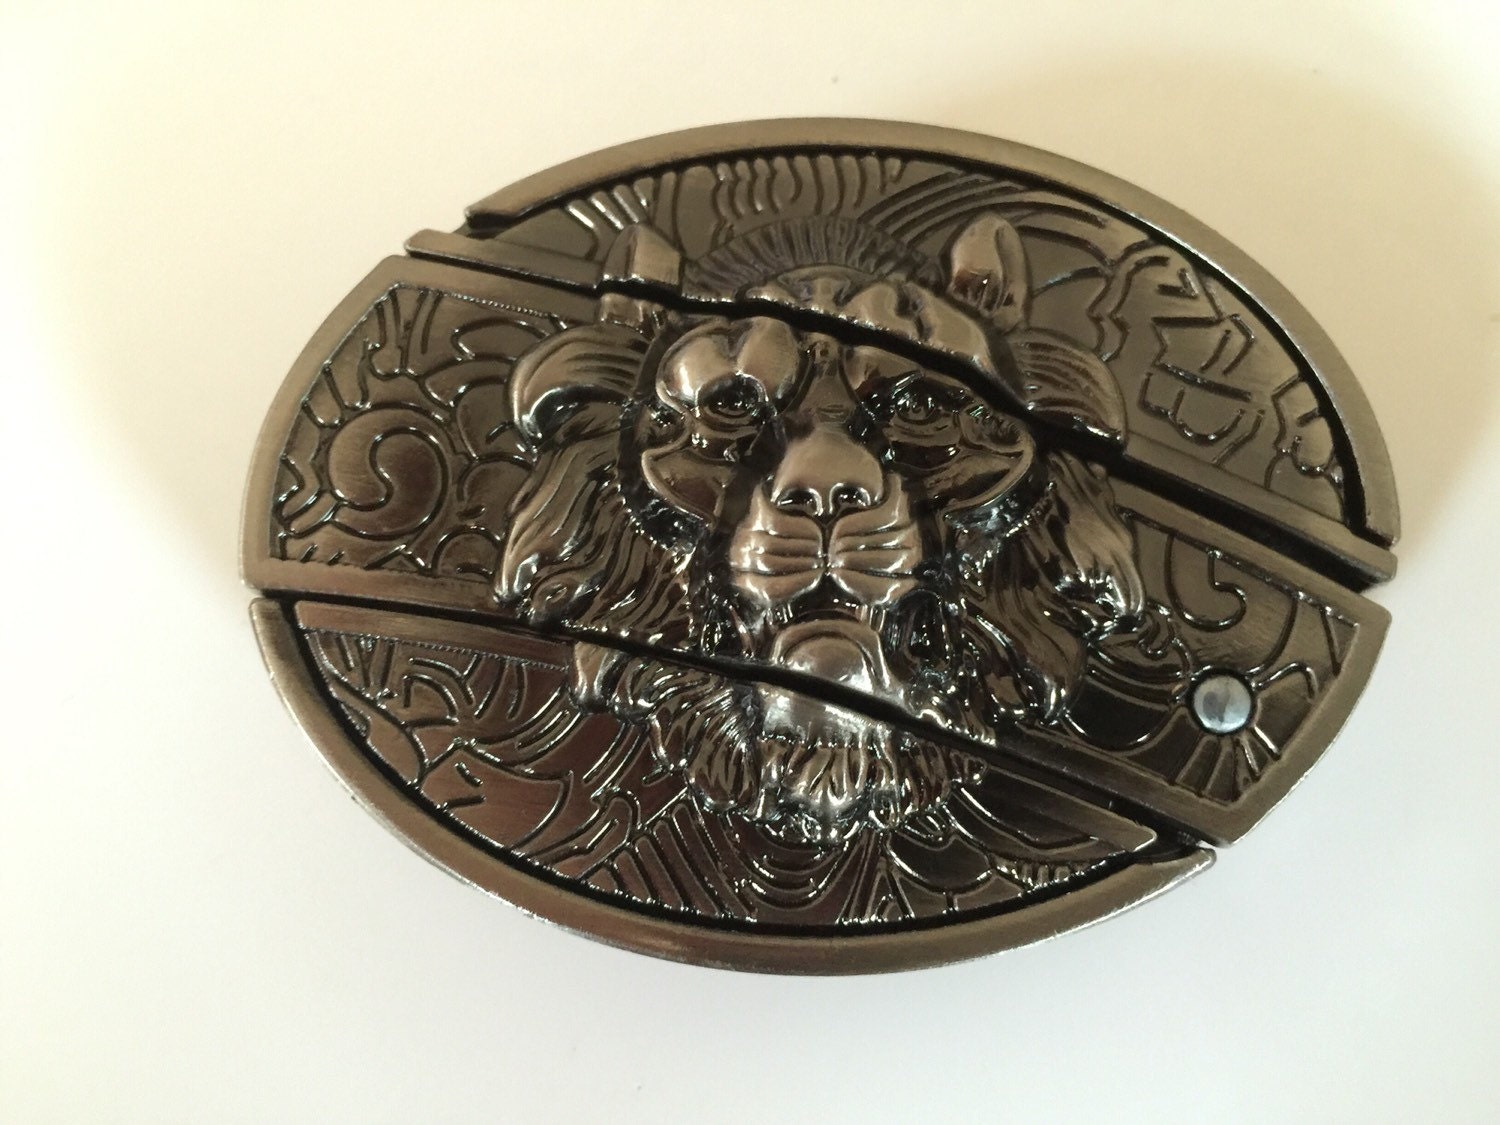 Lion Belt Buckle with built in knife